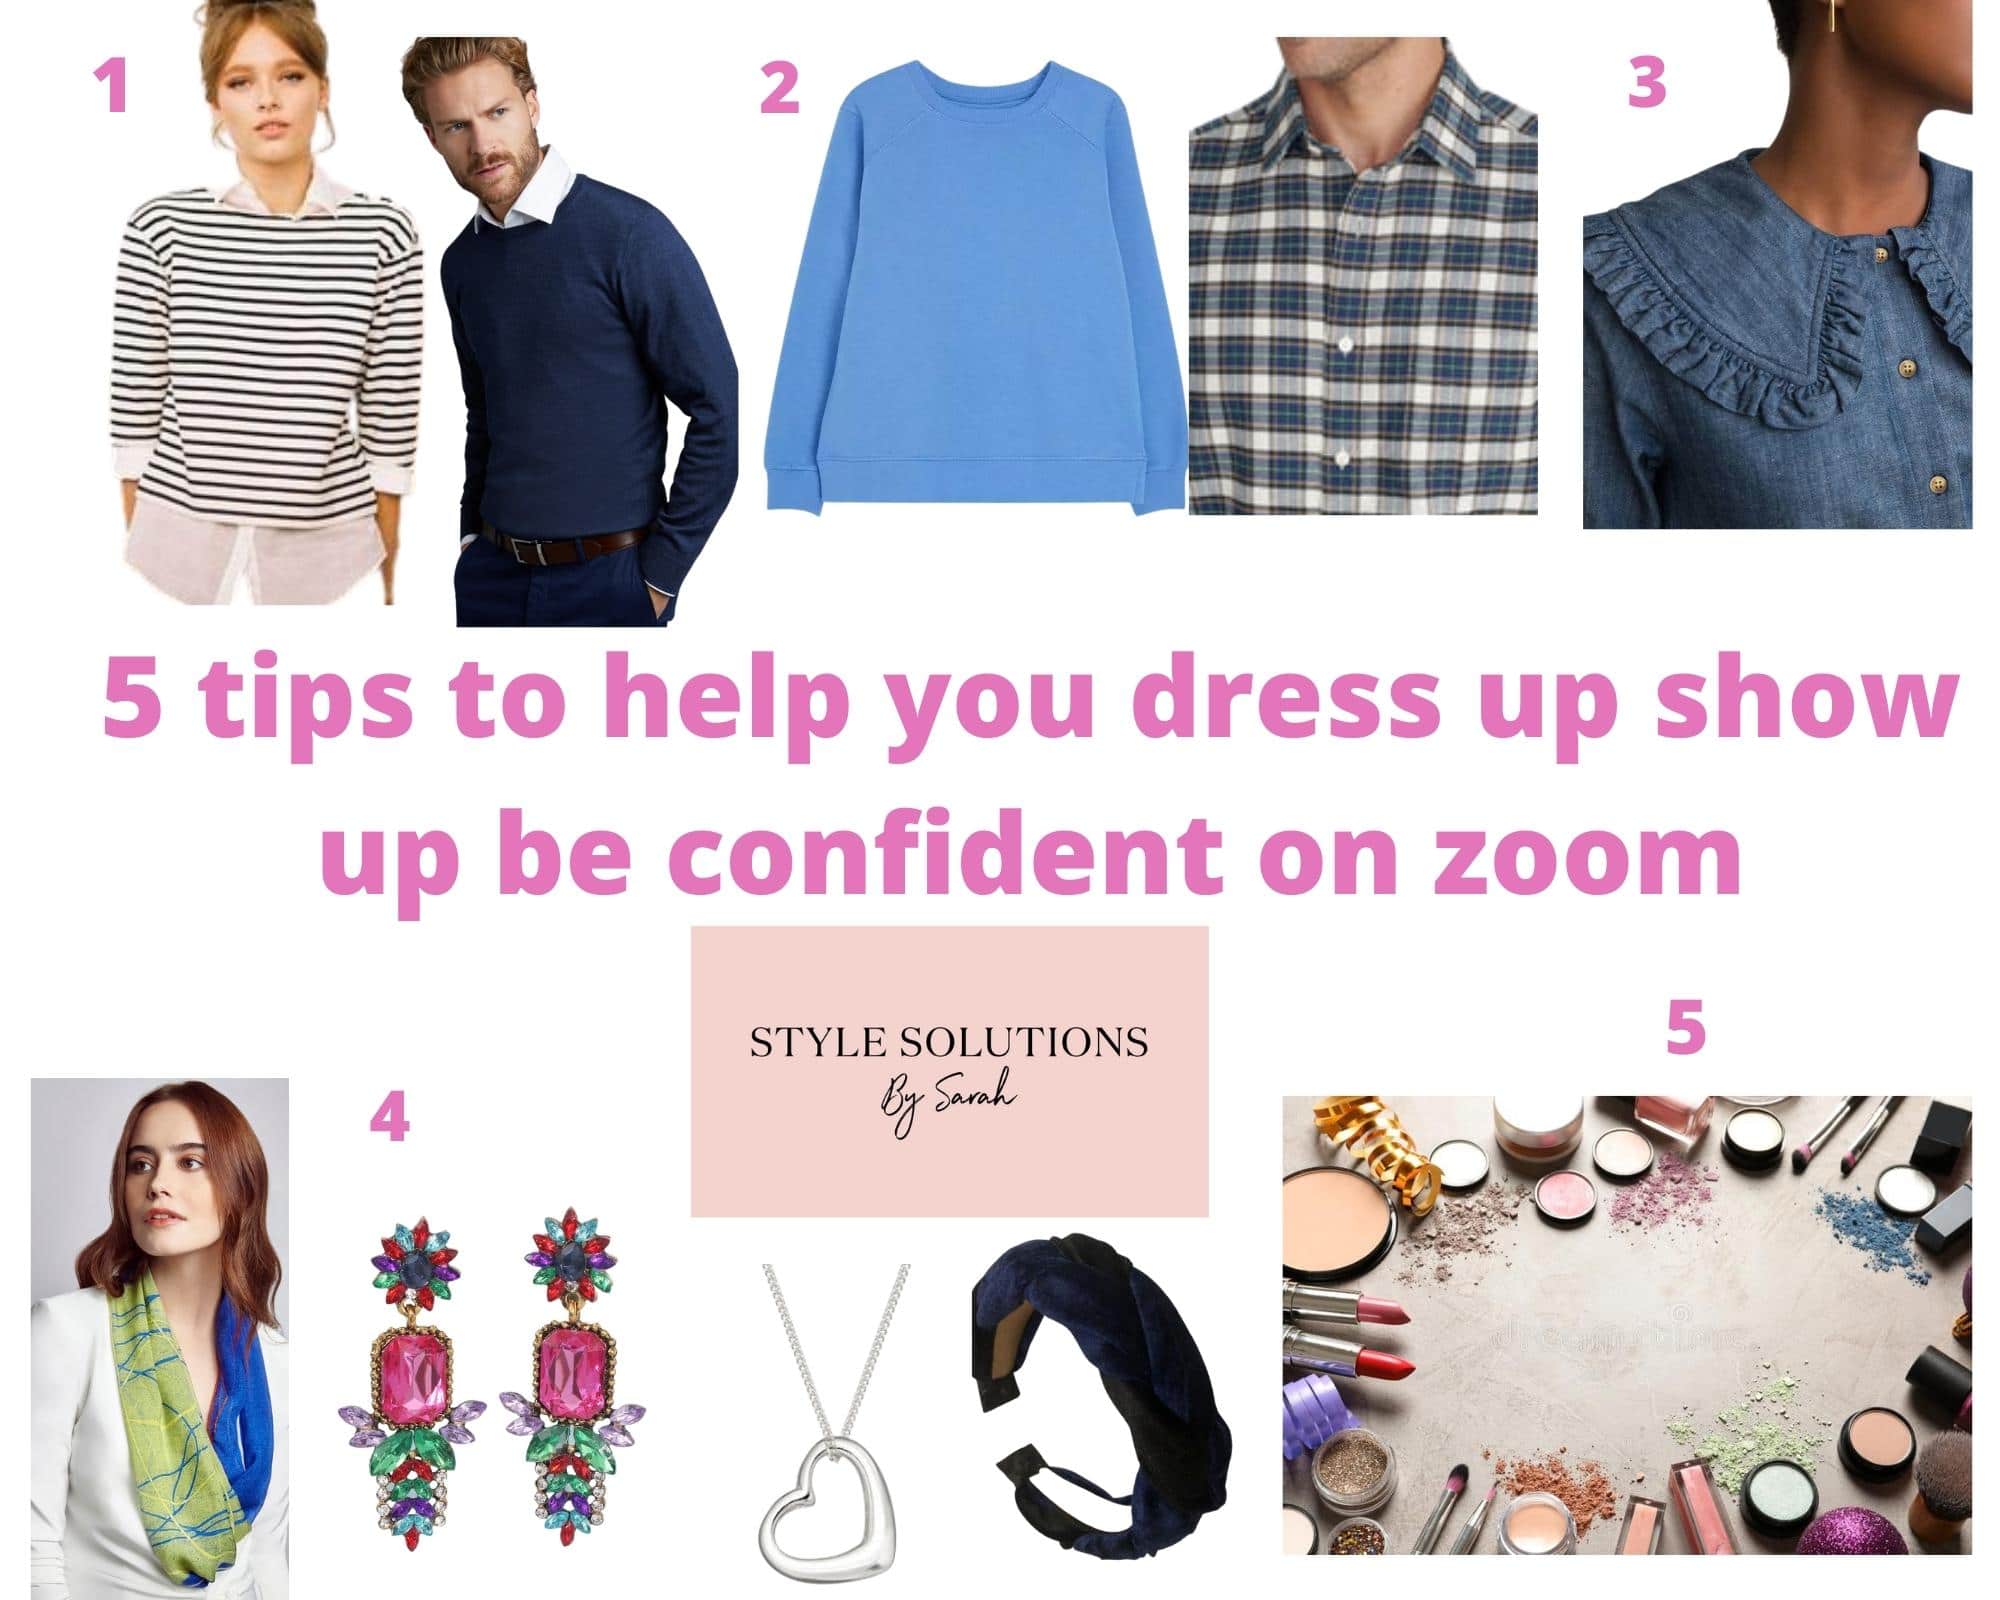 5 tips to help you dress up, show up, be confident on zoom